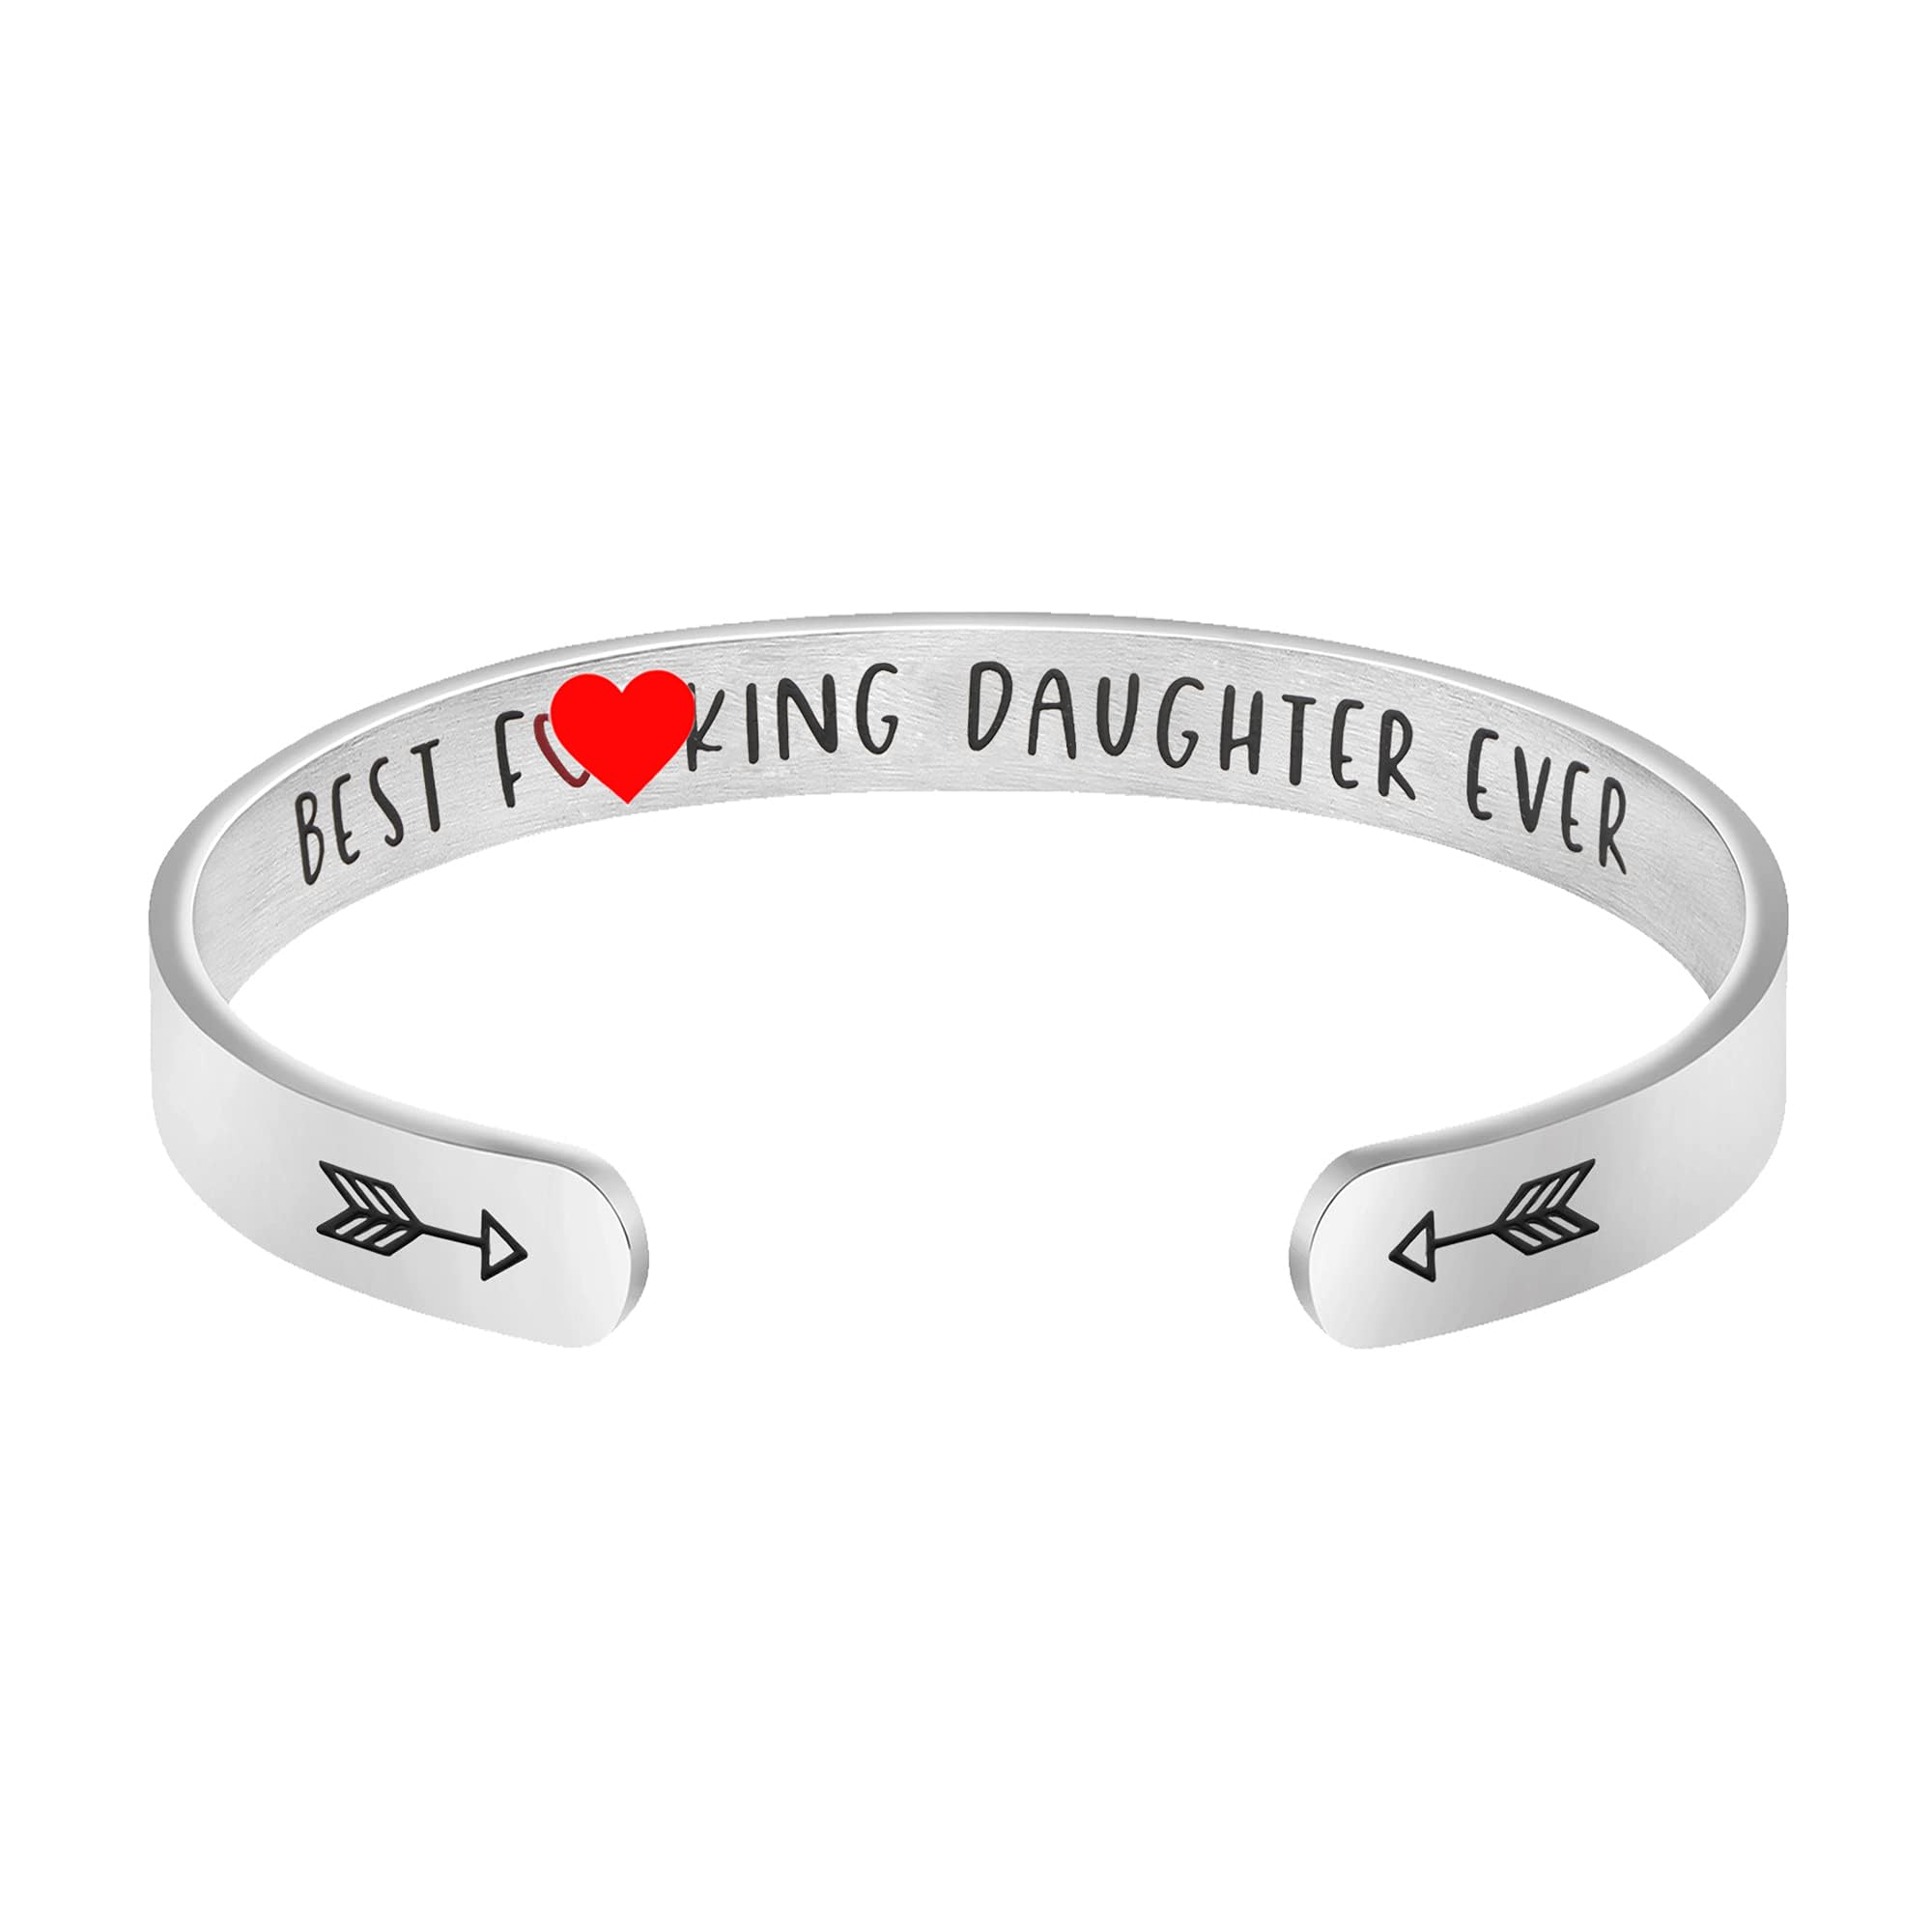 JoycuFF Daughter Gifts from Mom Dad Bracelets for Daughter Women Inspirational Jewelry Encouragement Bangle Stainless Steel Meta